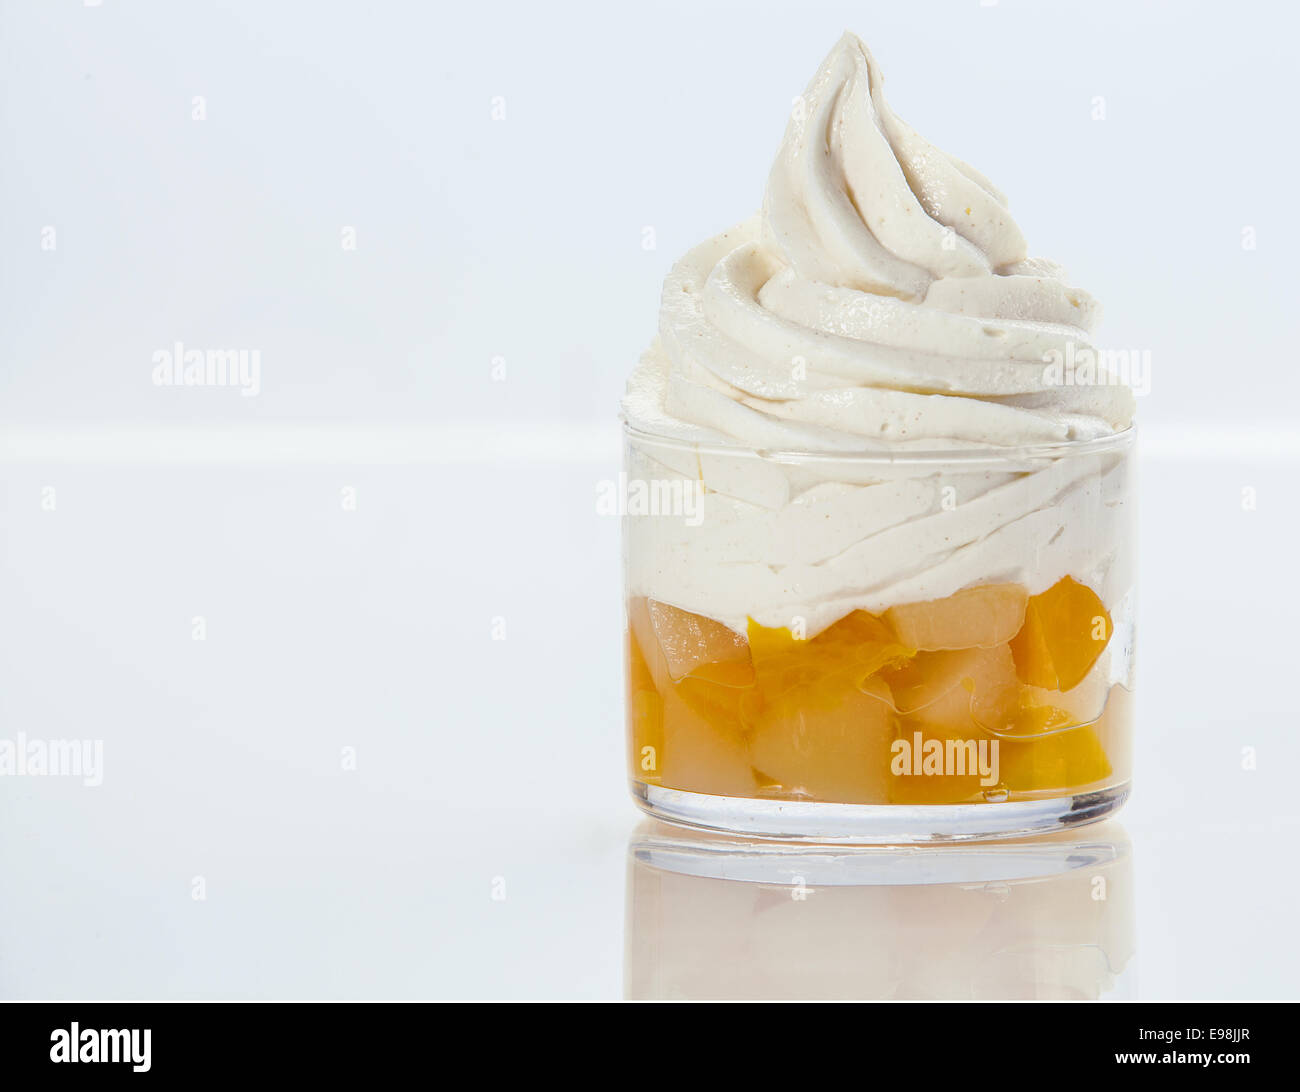 Fresh fruit salad topped with a swirl of healthy low-fat frozen yogurt served in a glass dish on white with copyspace Stock Photo